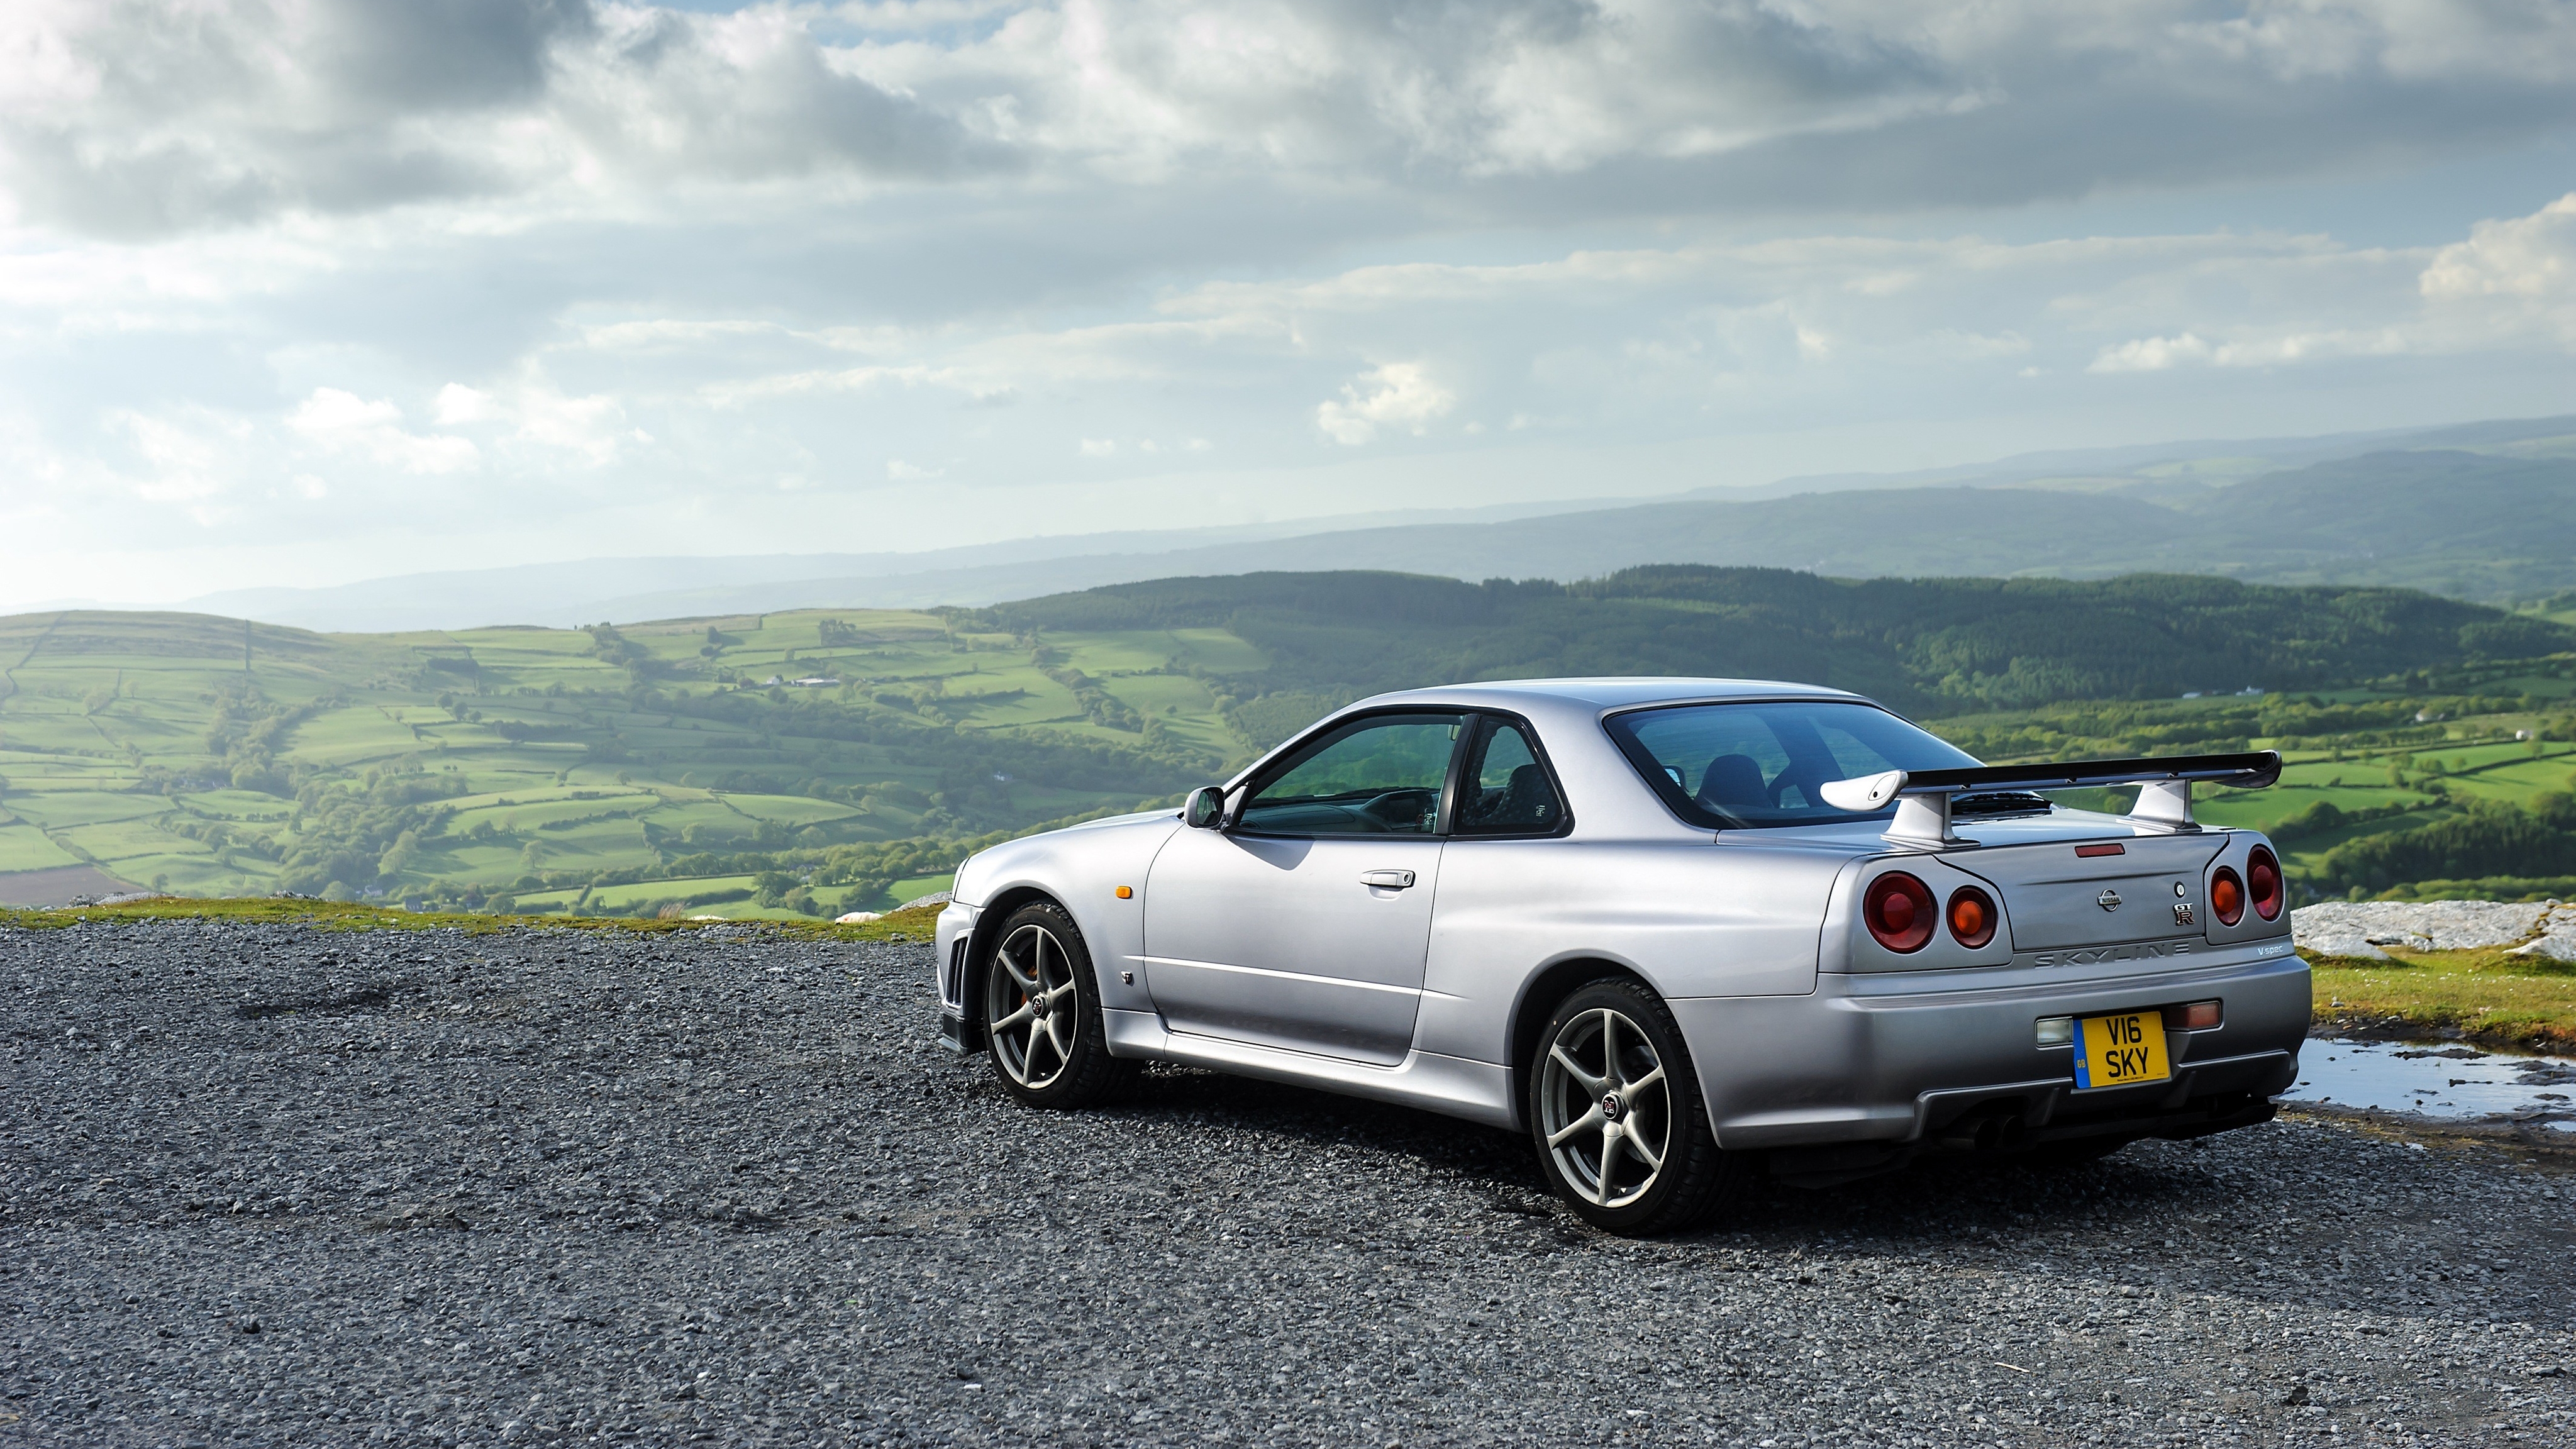 nissan, cars, side view, silver, silvery, gt-r, skyline